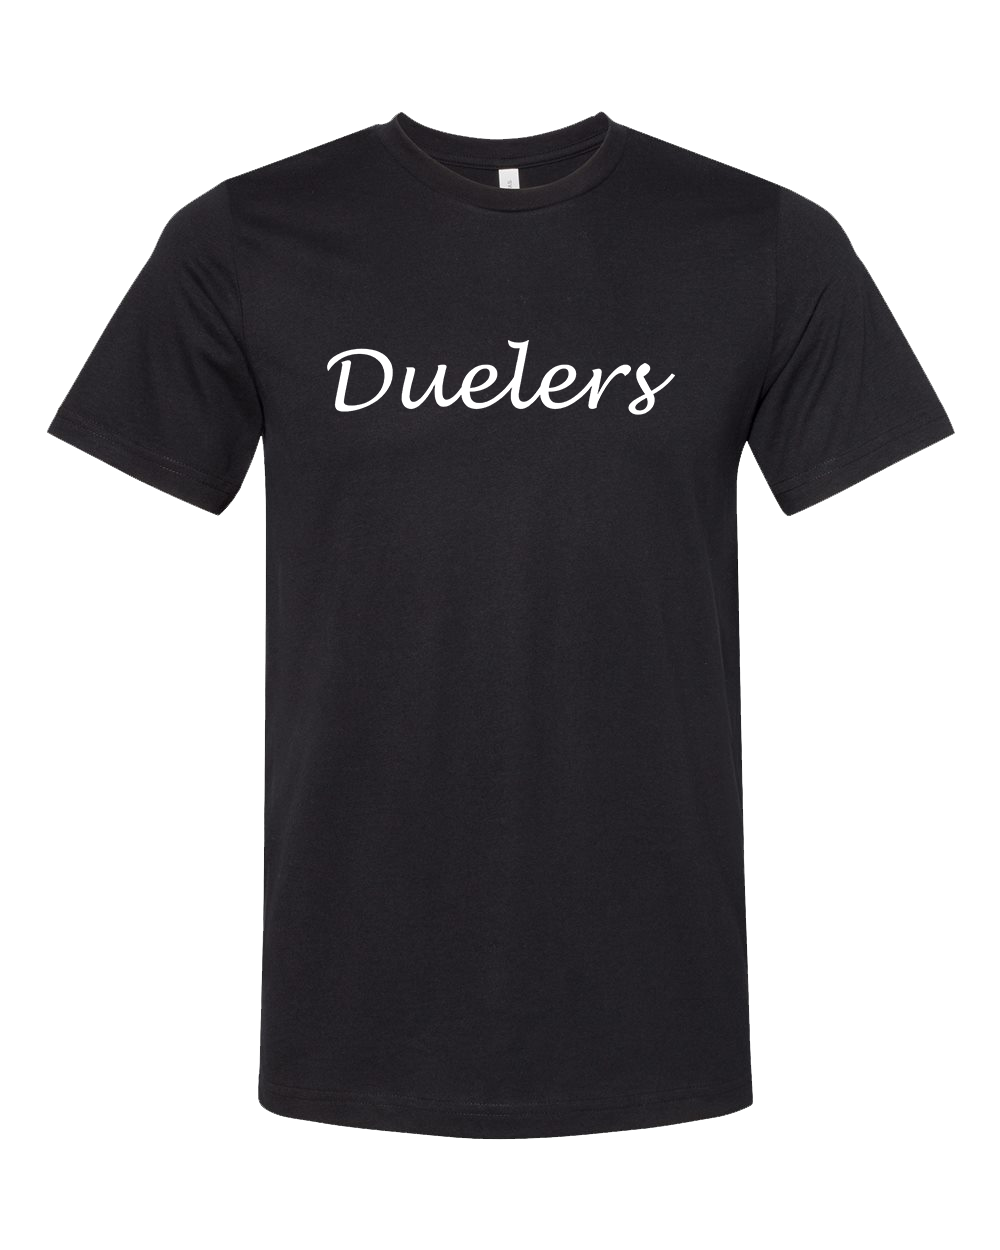 Duelers Black Staff Tee (and V-neck)